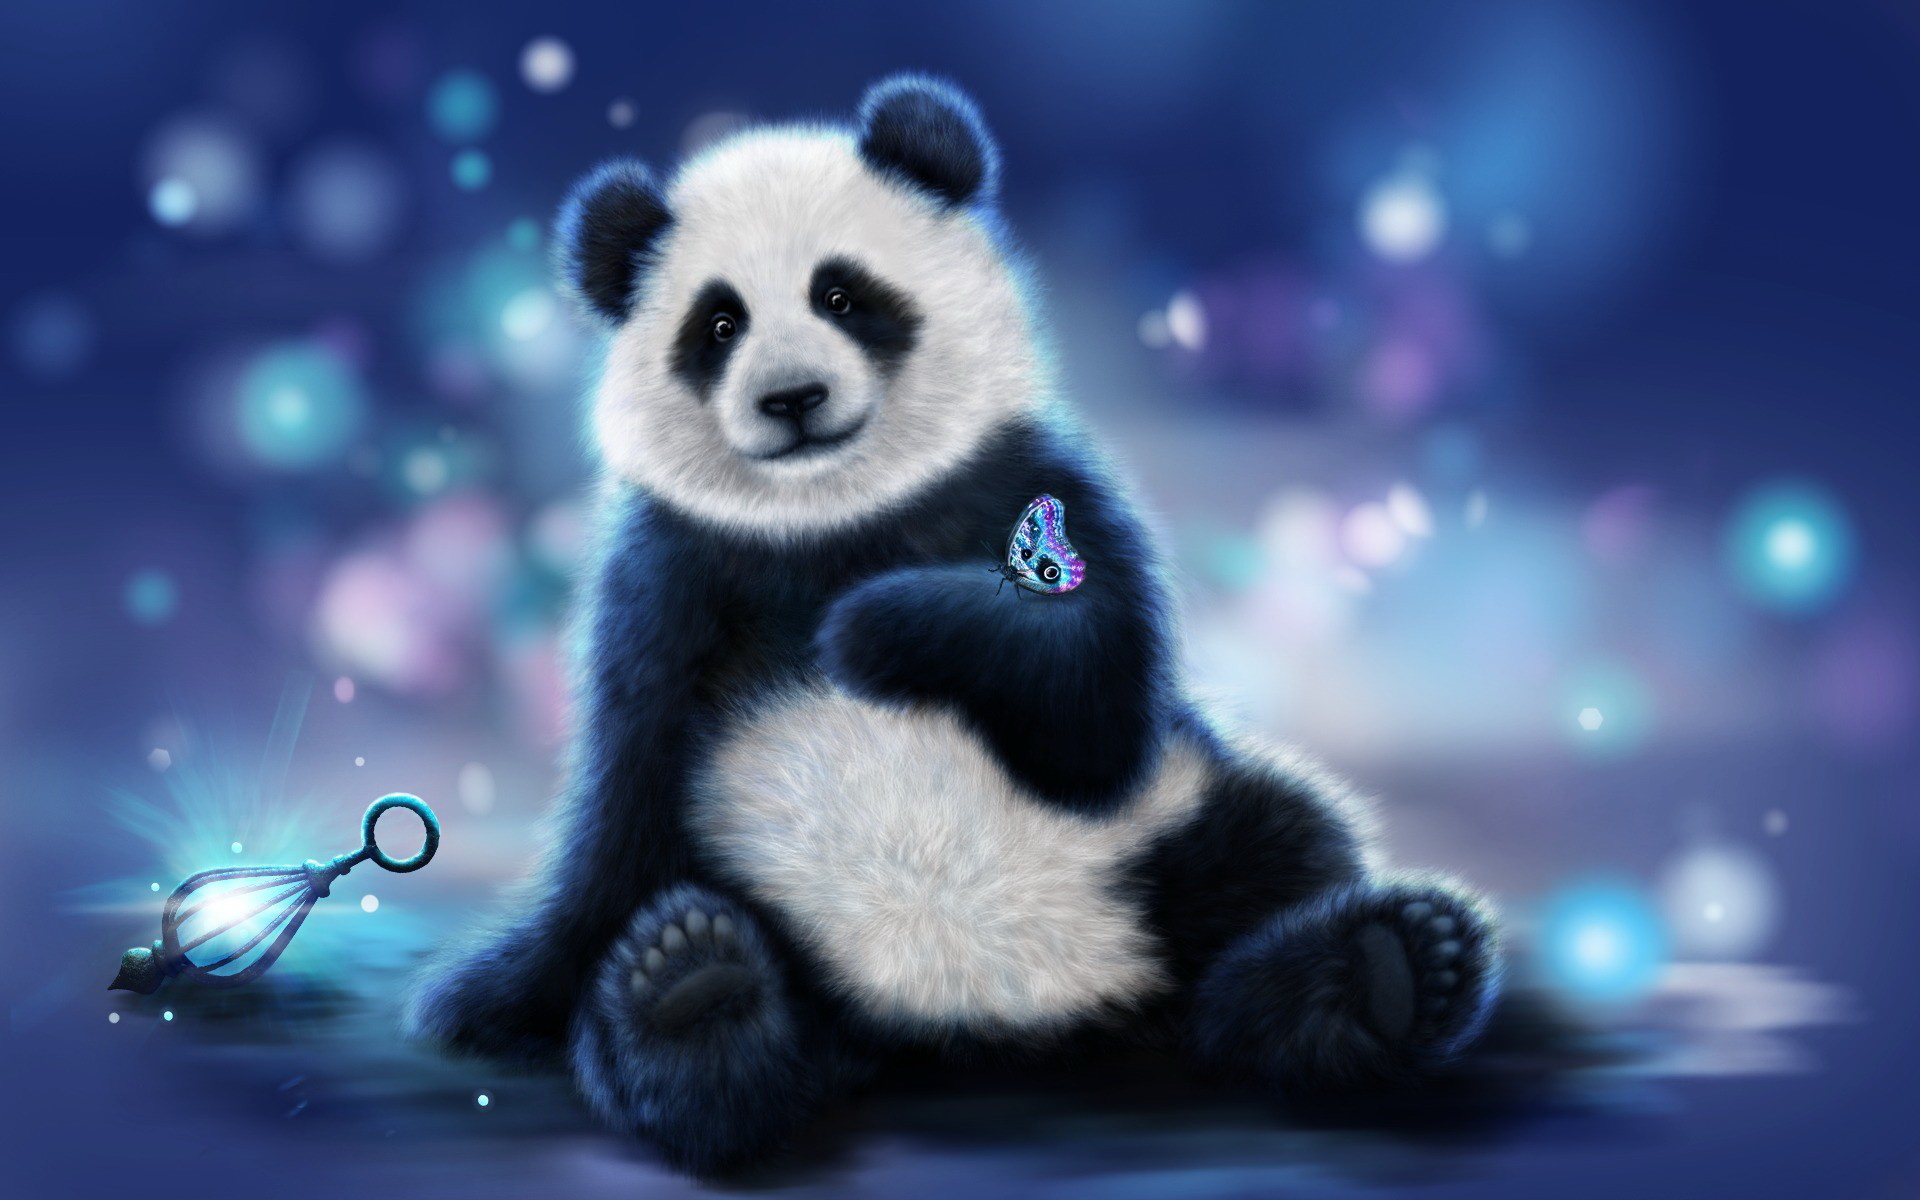 Butterfly On Cute Panda Hand Animated Wallpaper